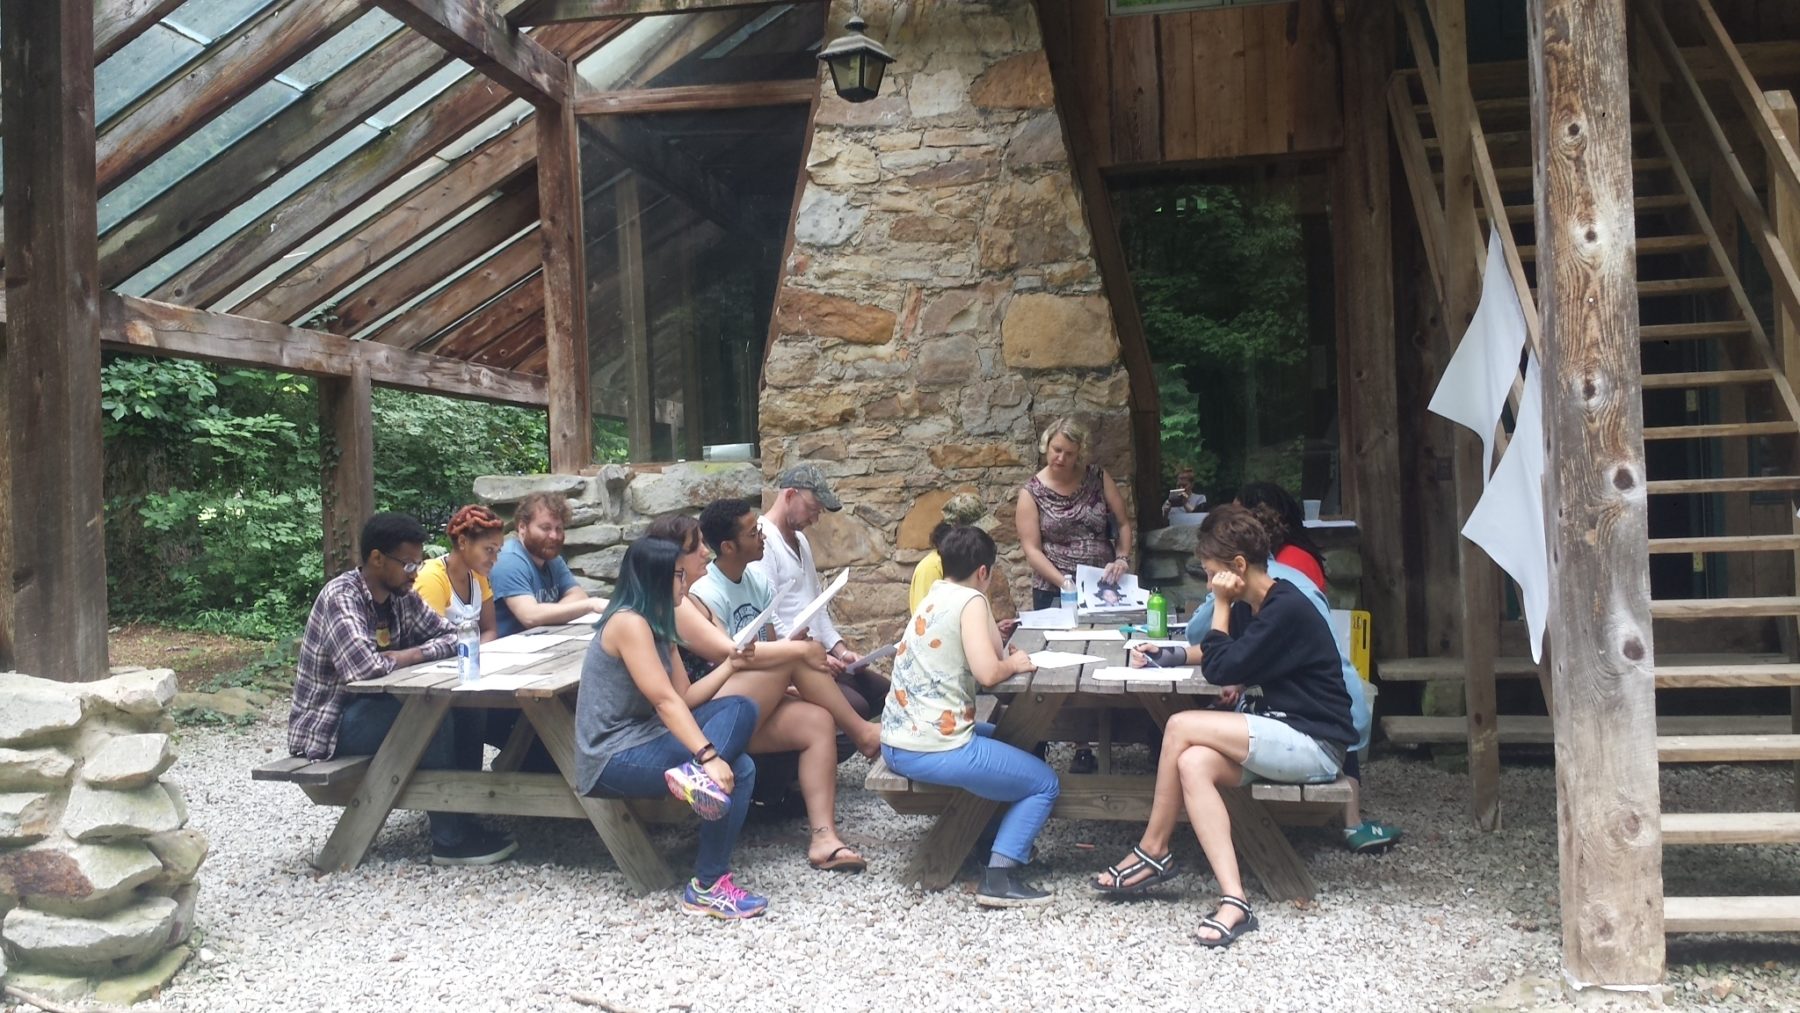 A group of staff members sits at picnic tables outside of a wooden and stone cabin.